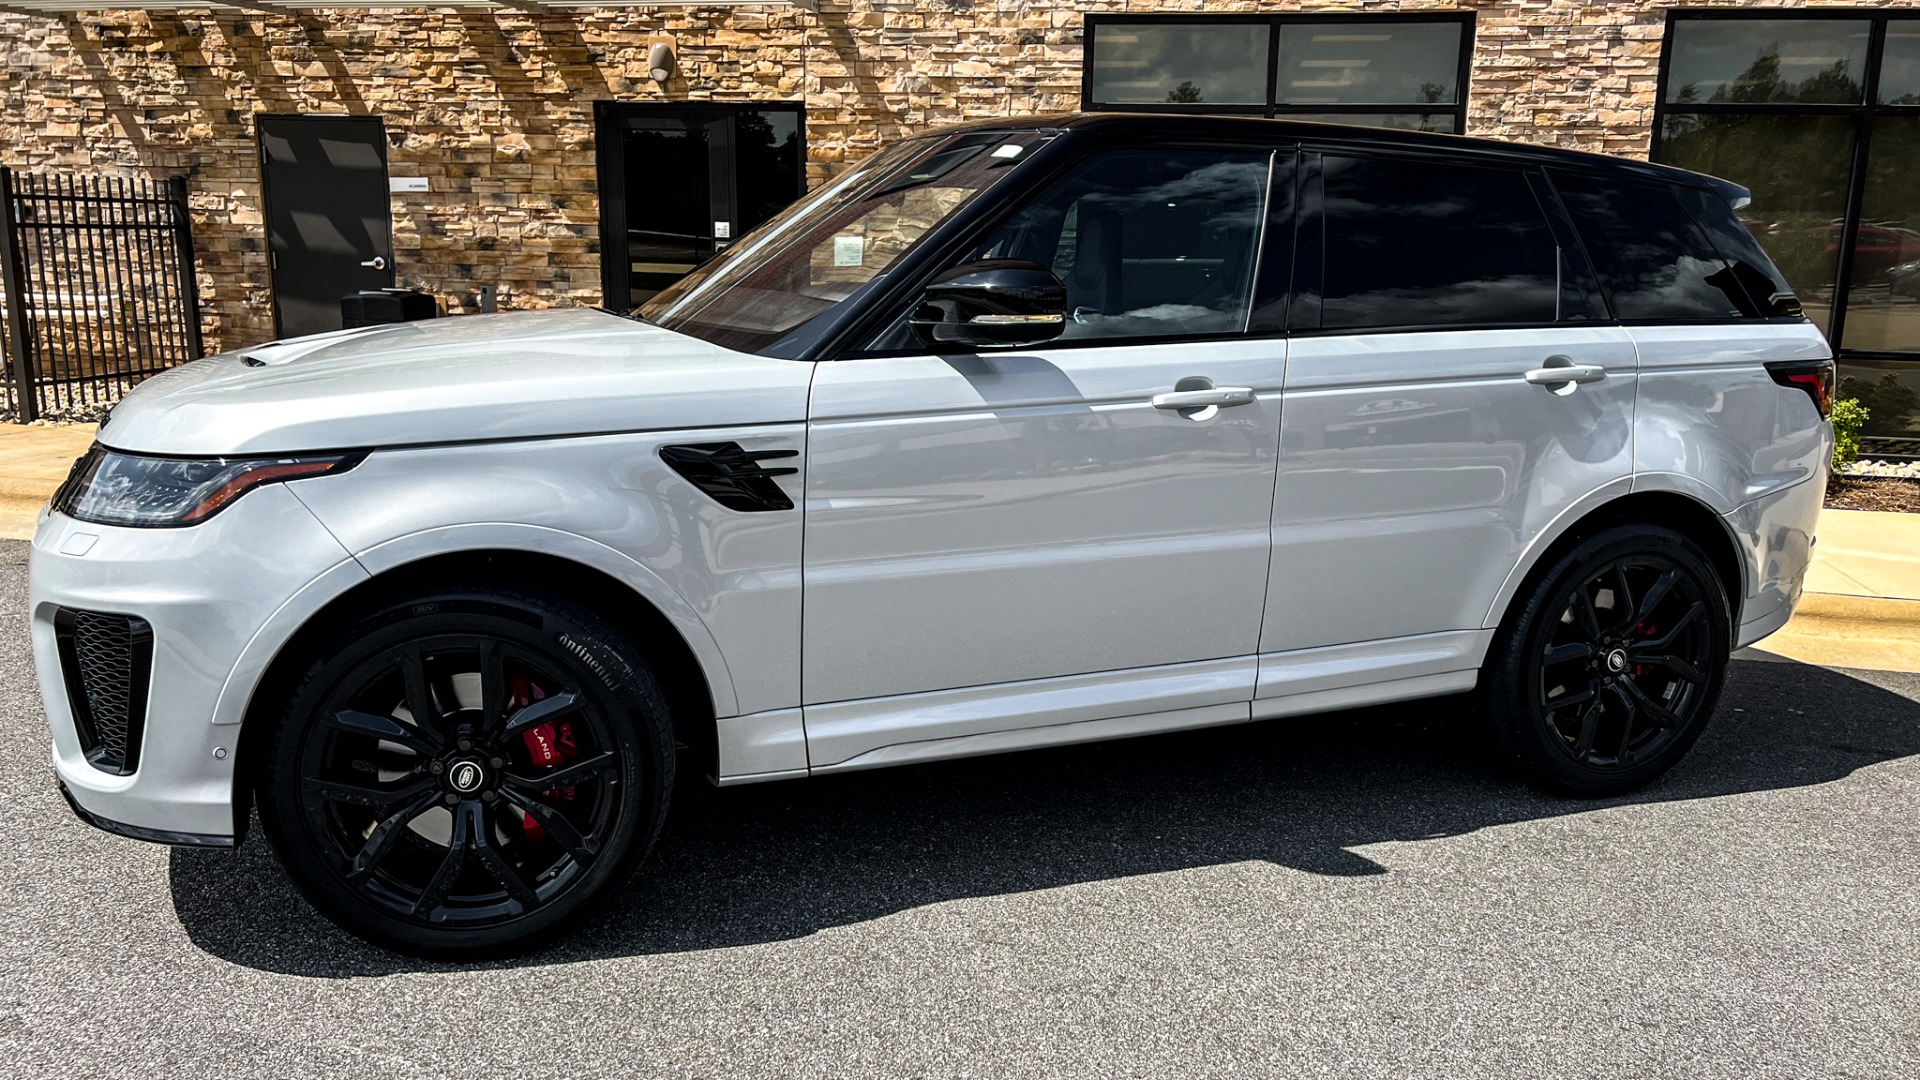 Used 2018 Land Rover Range Rover Sport SVR / SVO ULTRA METALLIC PAINT / MERIDIAN SIGNATURE / 22IN WHEELS for sale Sold at Formula Imports in Charlotte NC 28227 2